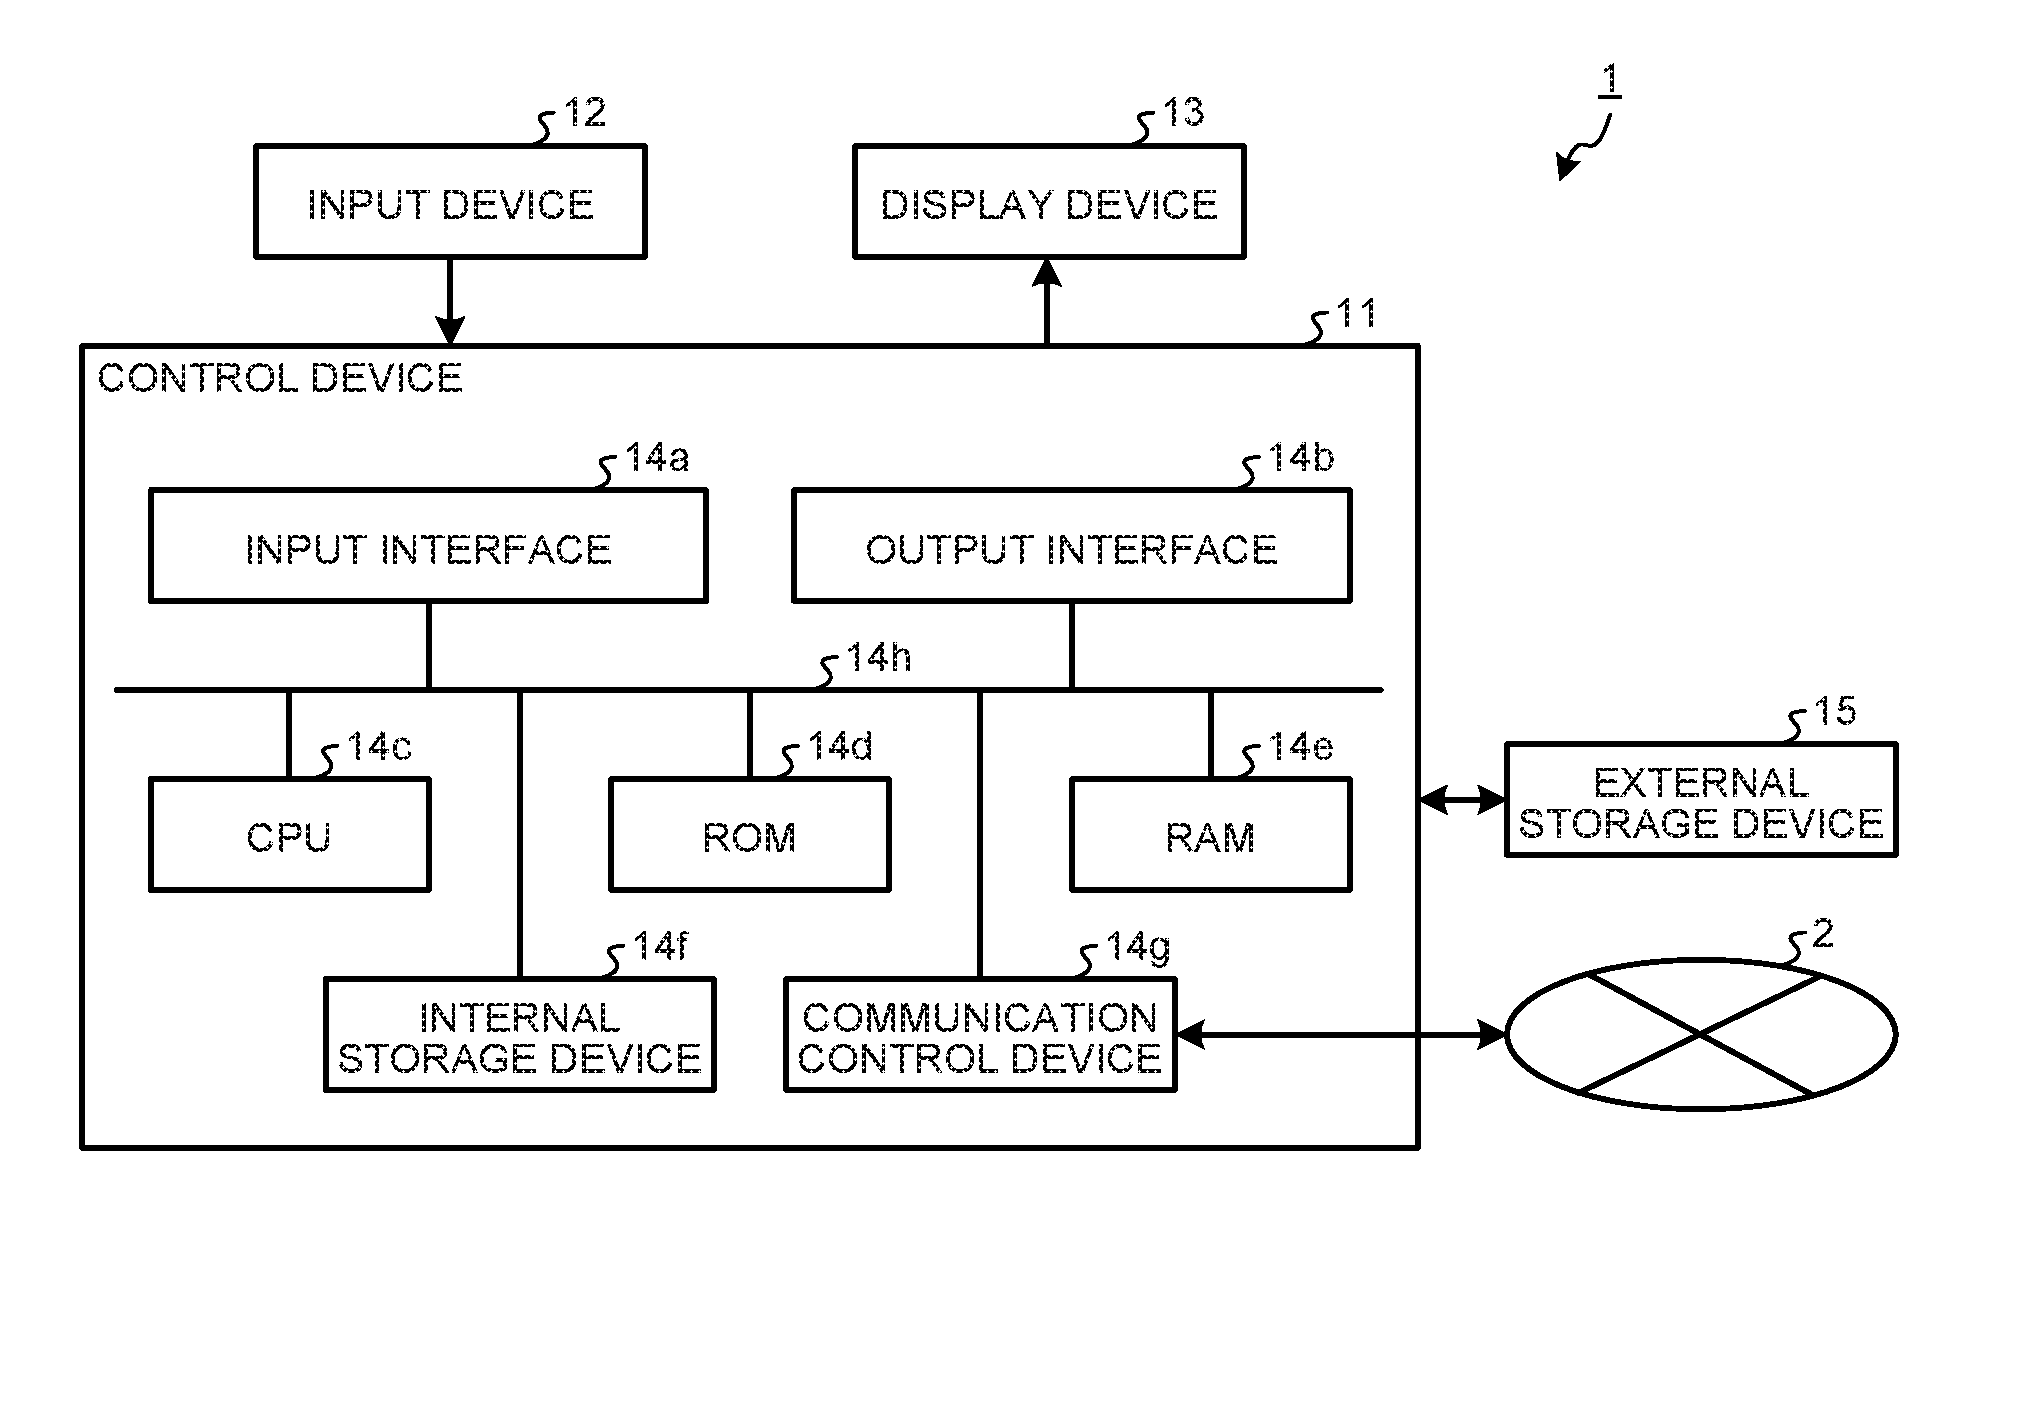 Motor selection device